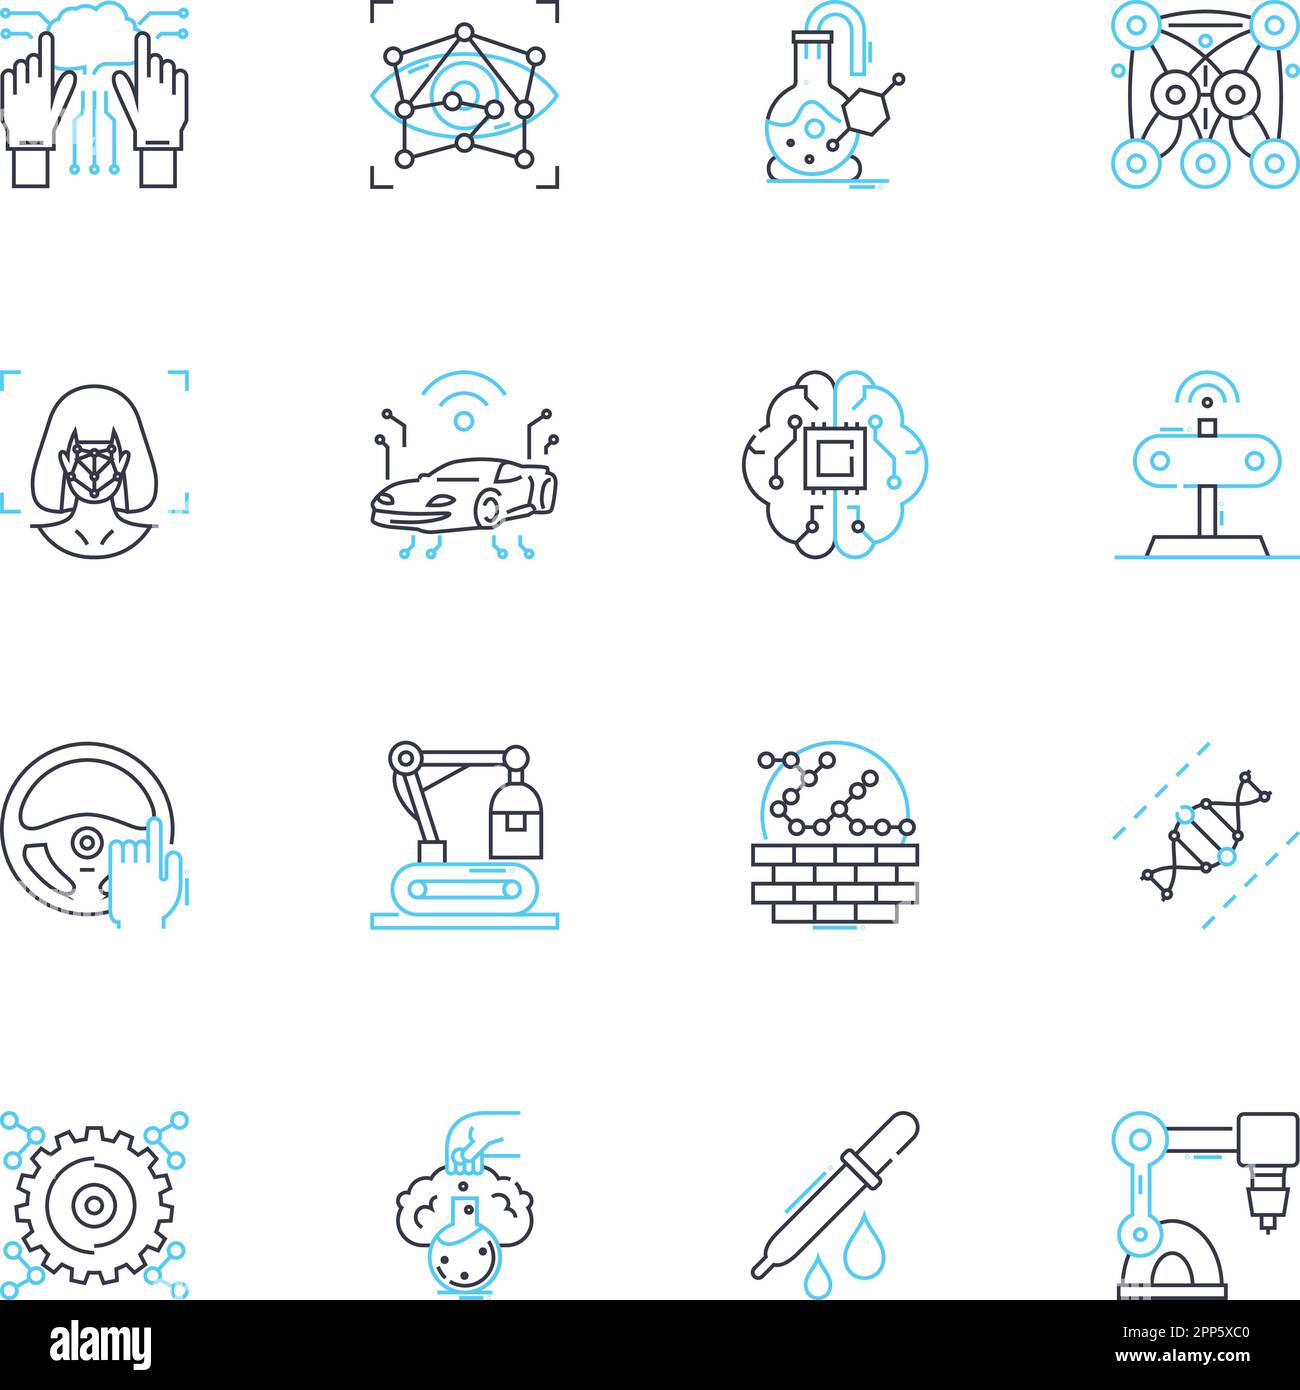 Imitation innovation linear icons set. Mimicry, Replication, Copying ...